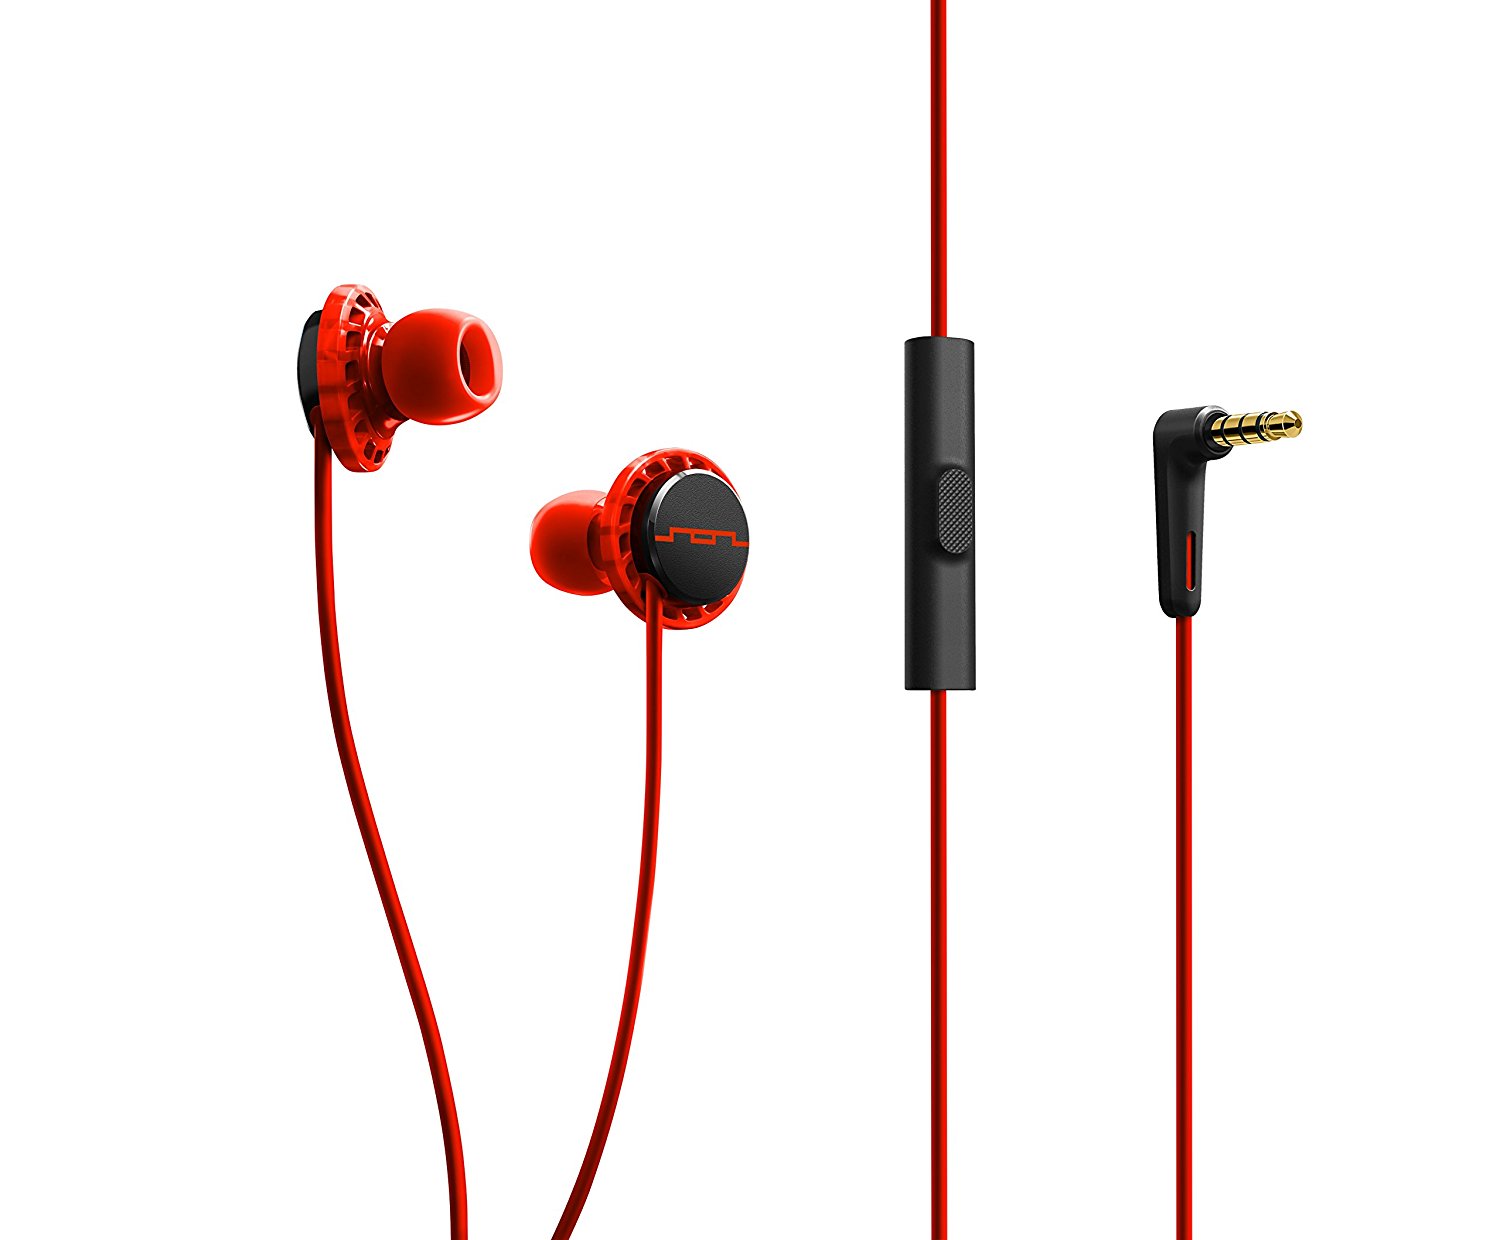 SOL REPUBLIC RLY AI FLR RED 1131-33  1131-33 Everyday Active Relays Ear buds Headphones for iPhone - Red